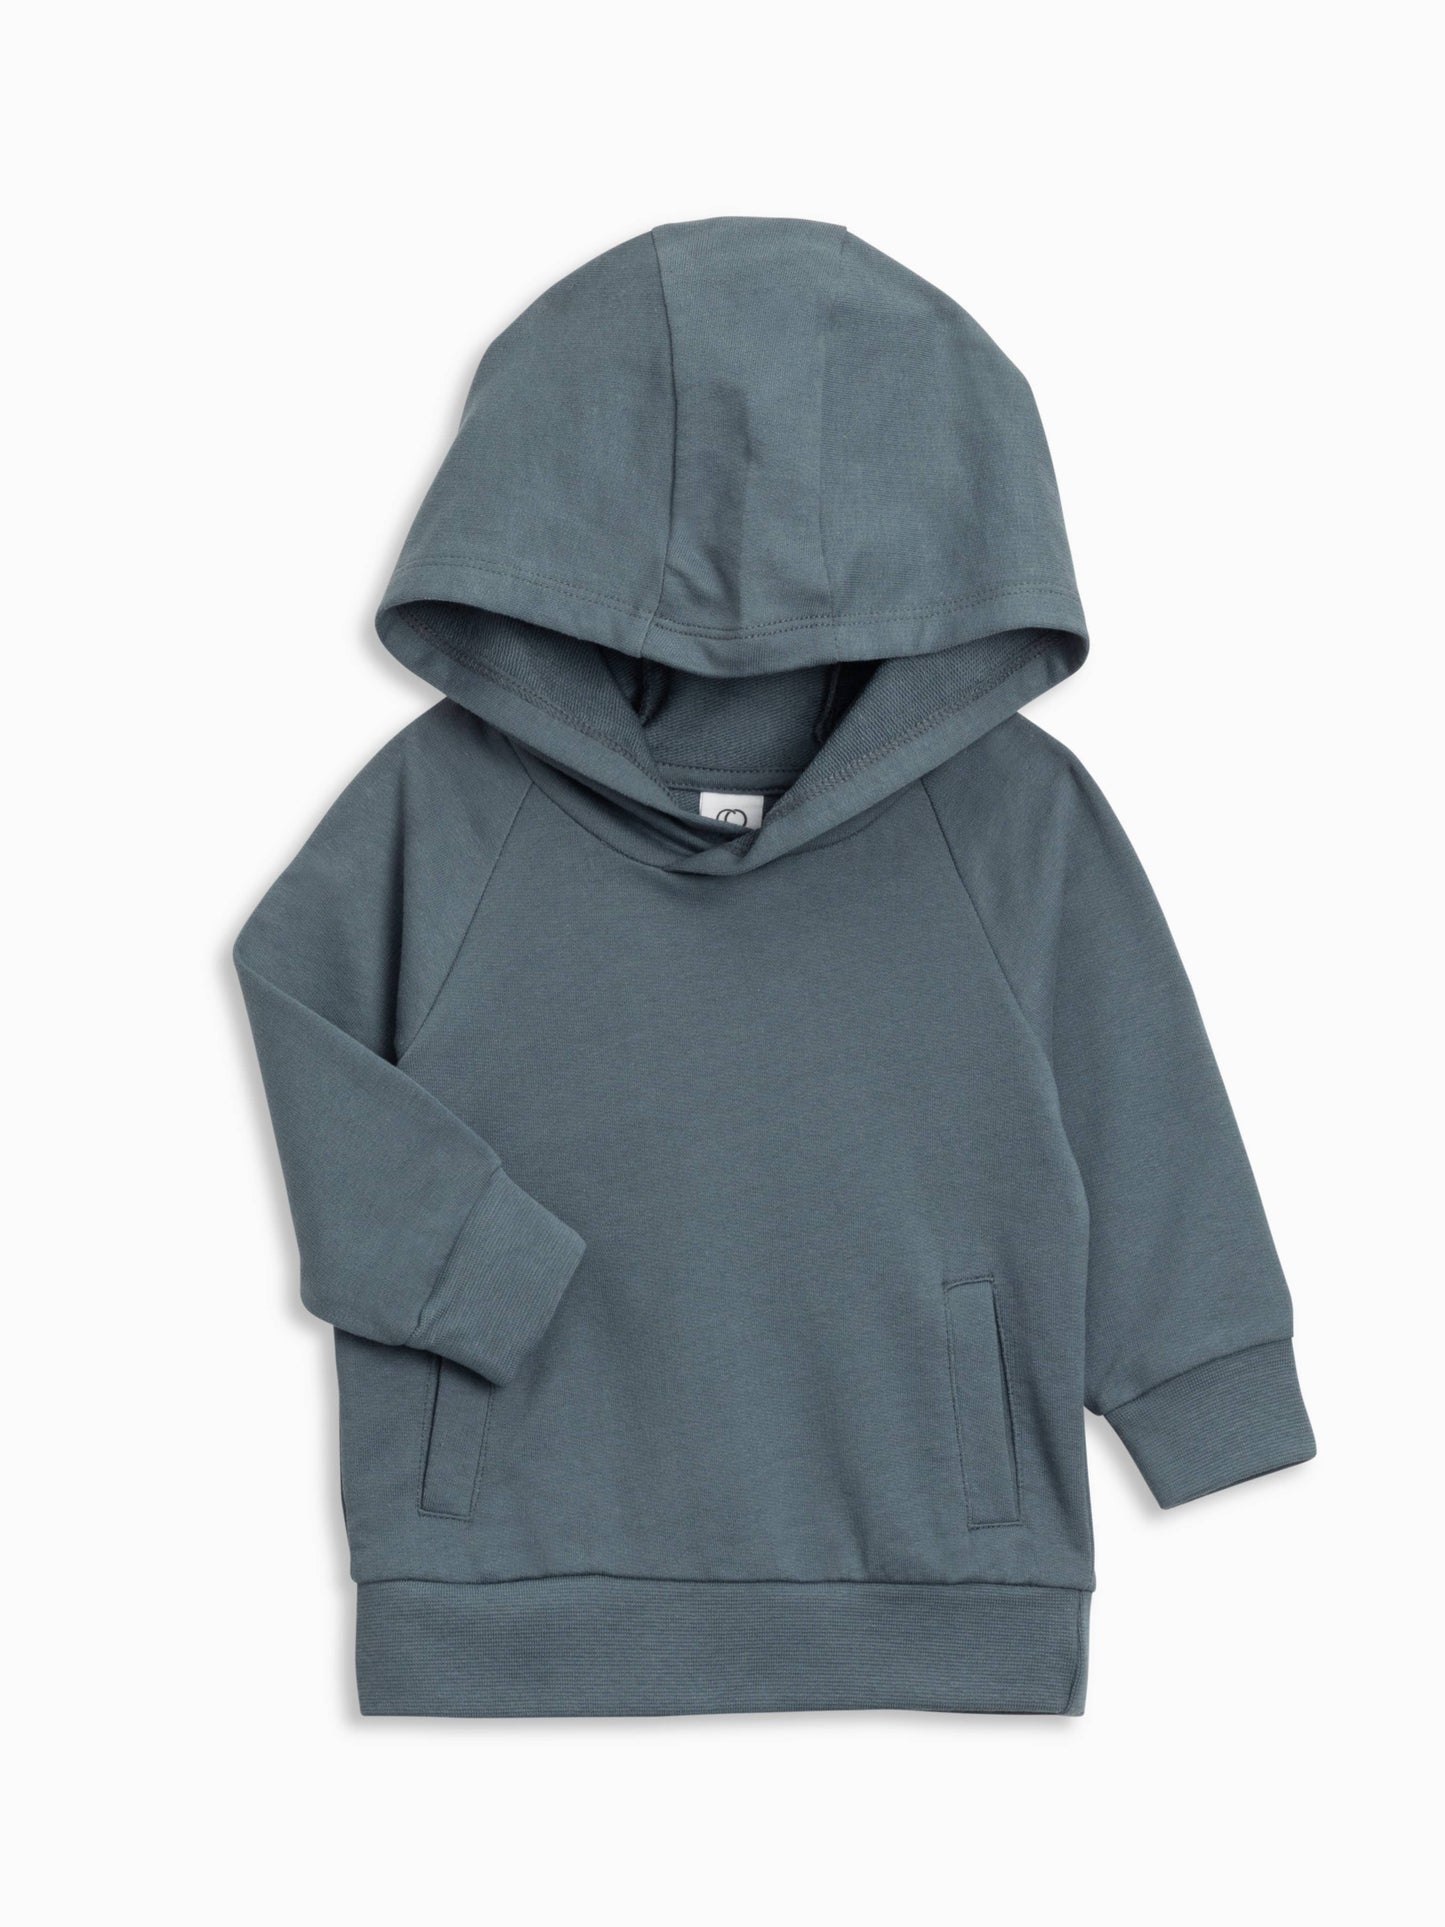 Ashland French Terry Hooded Pullover - Harbor